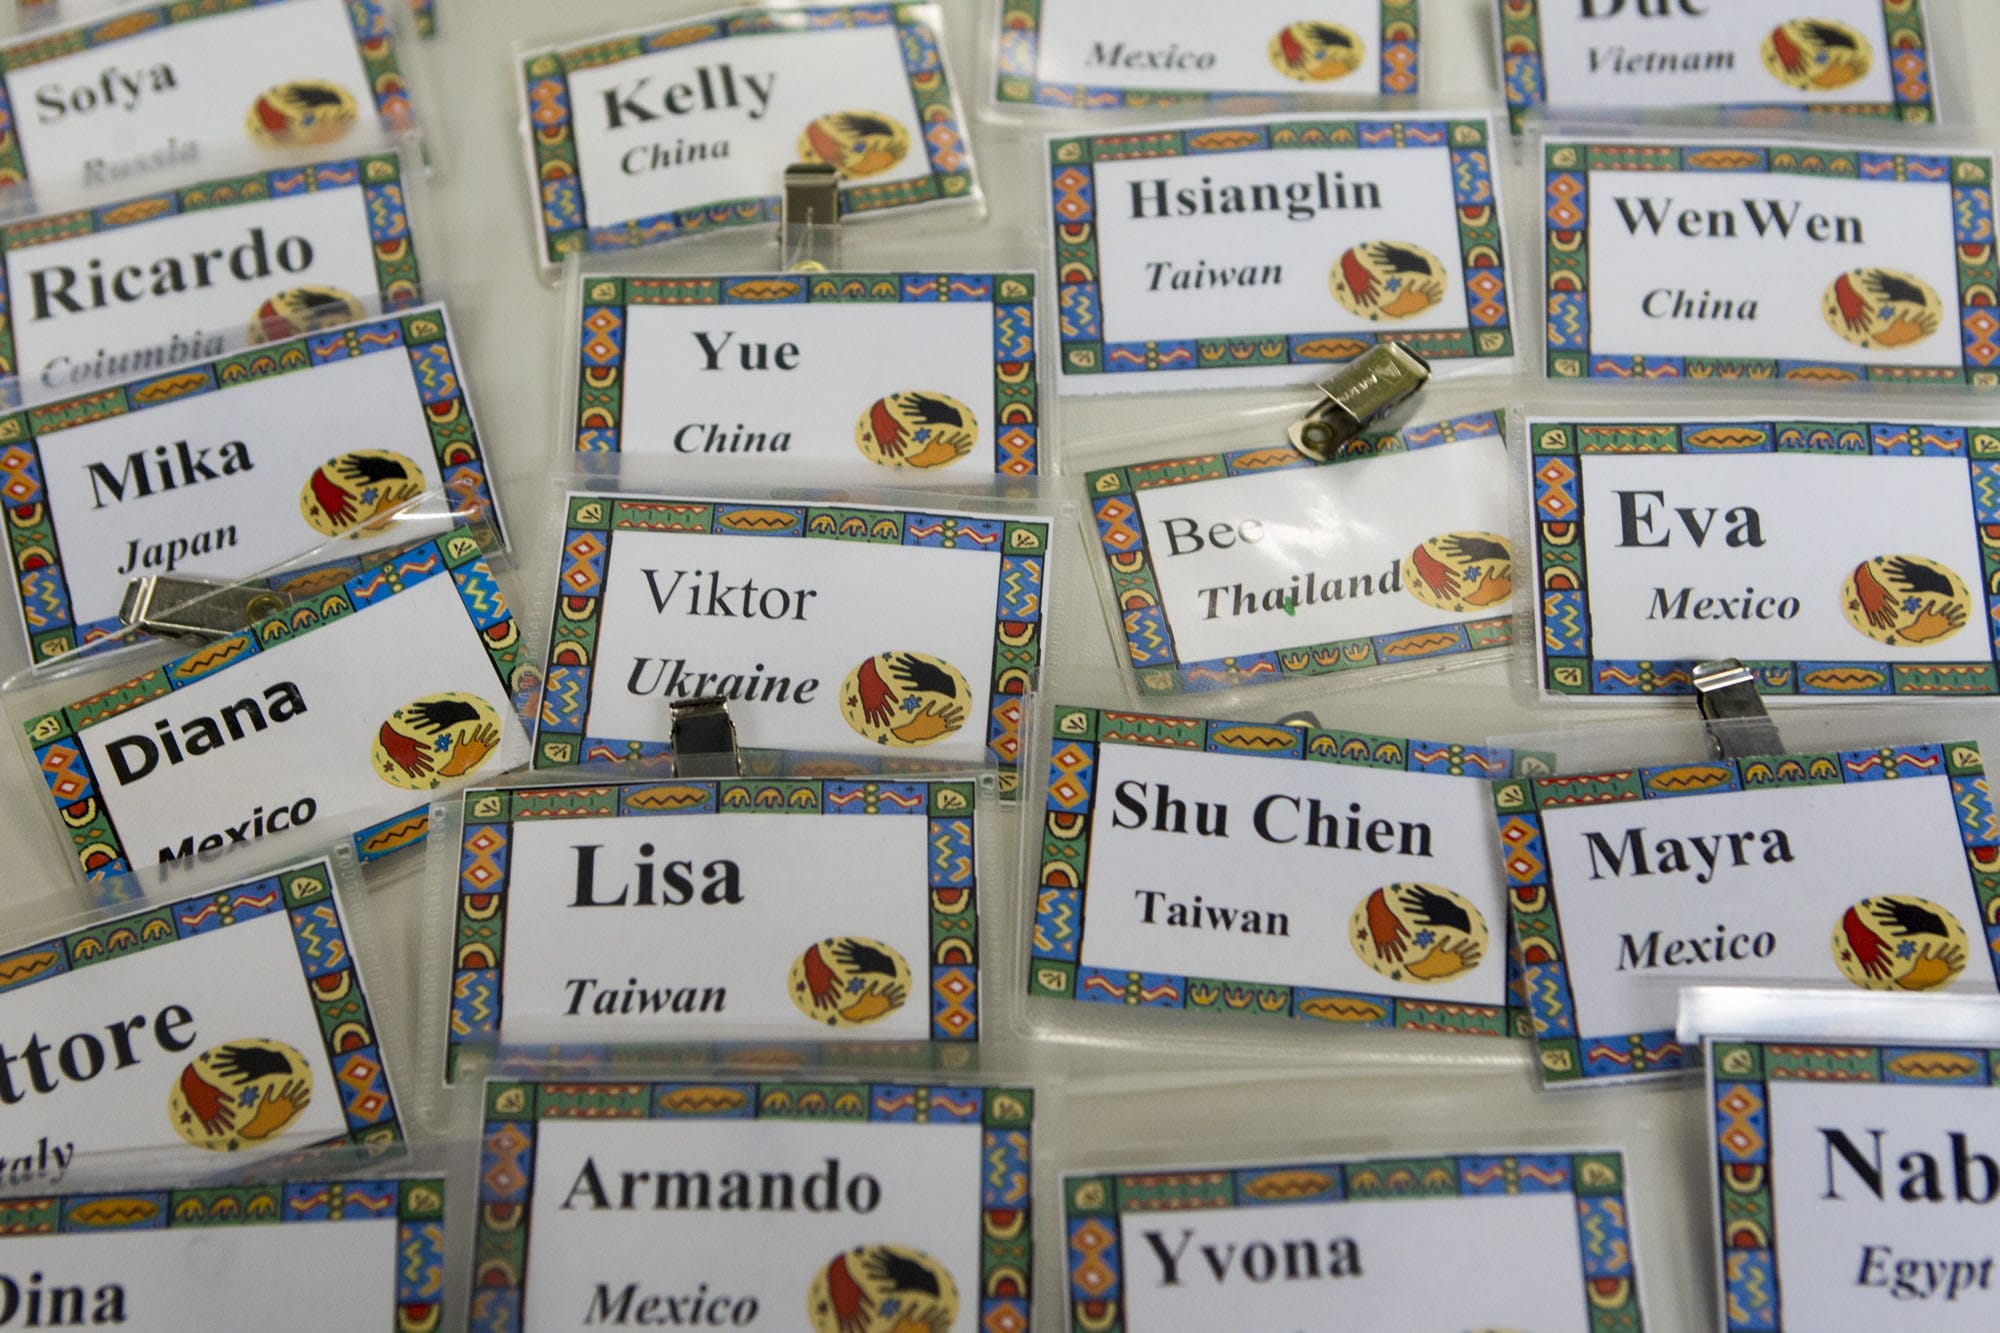 Name tags wait on a table for students who take part in an English conversation circle at Vancouver Community Library.